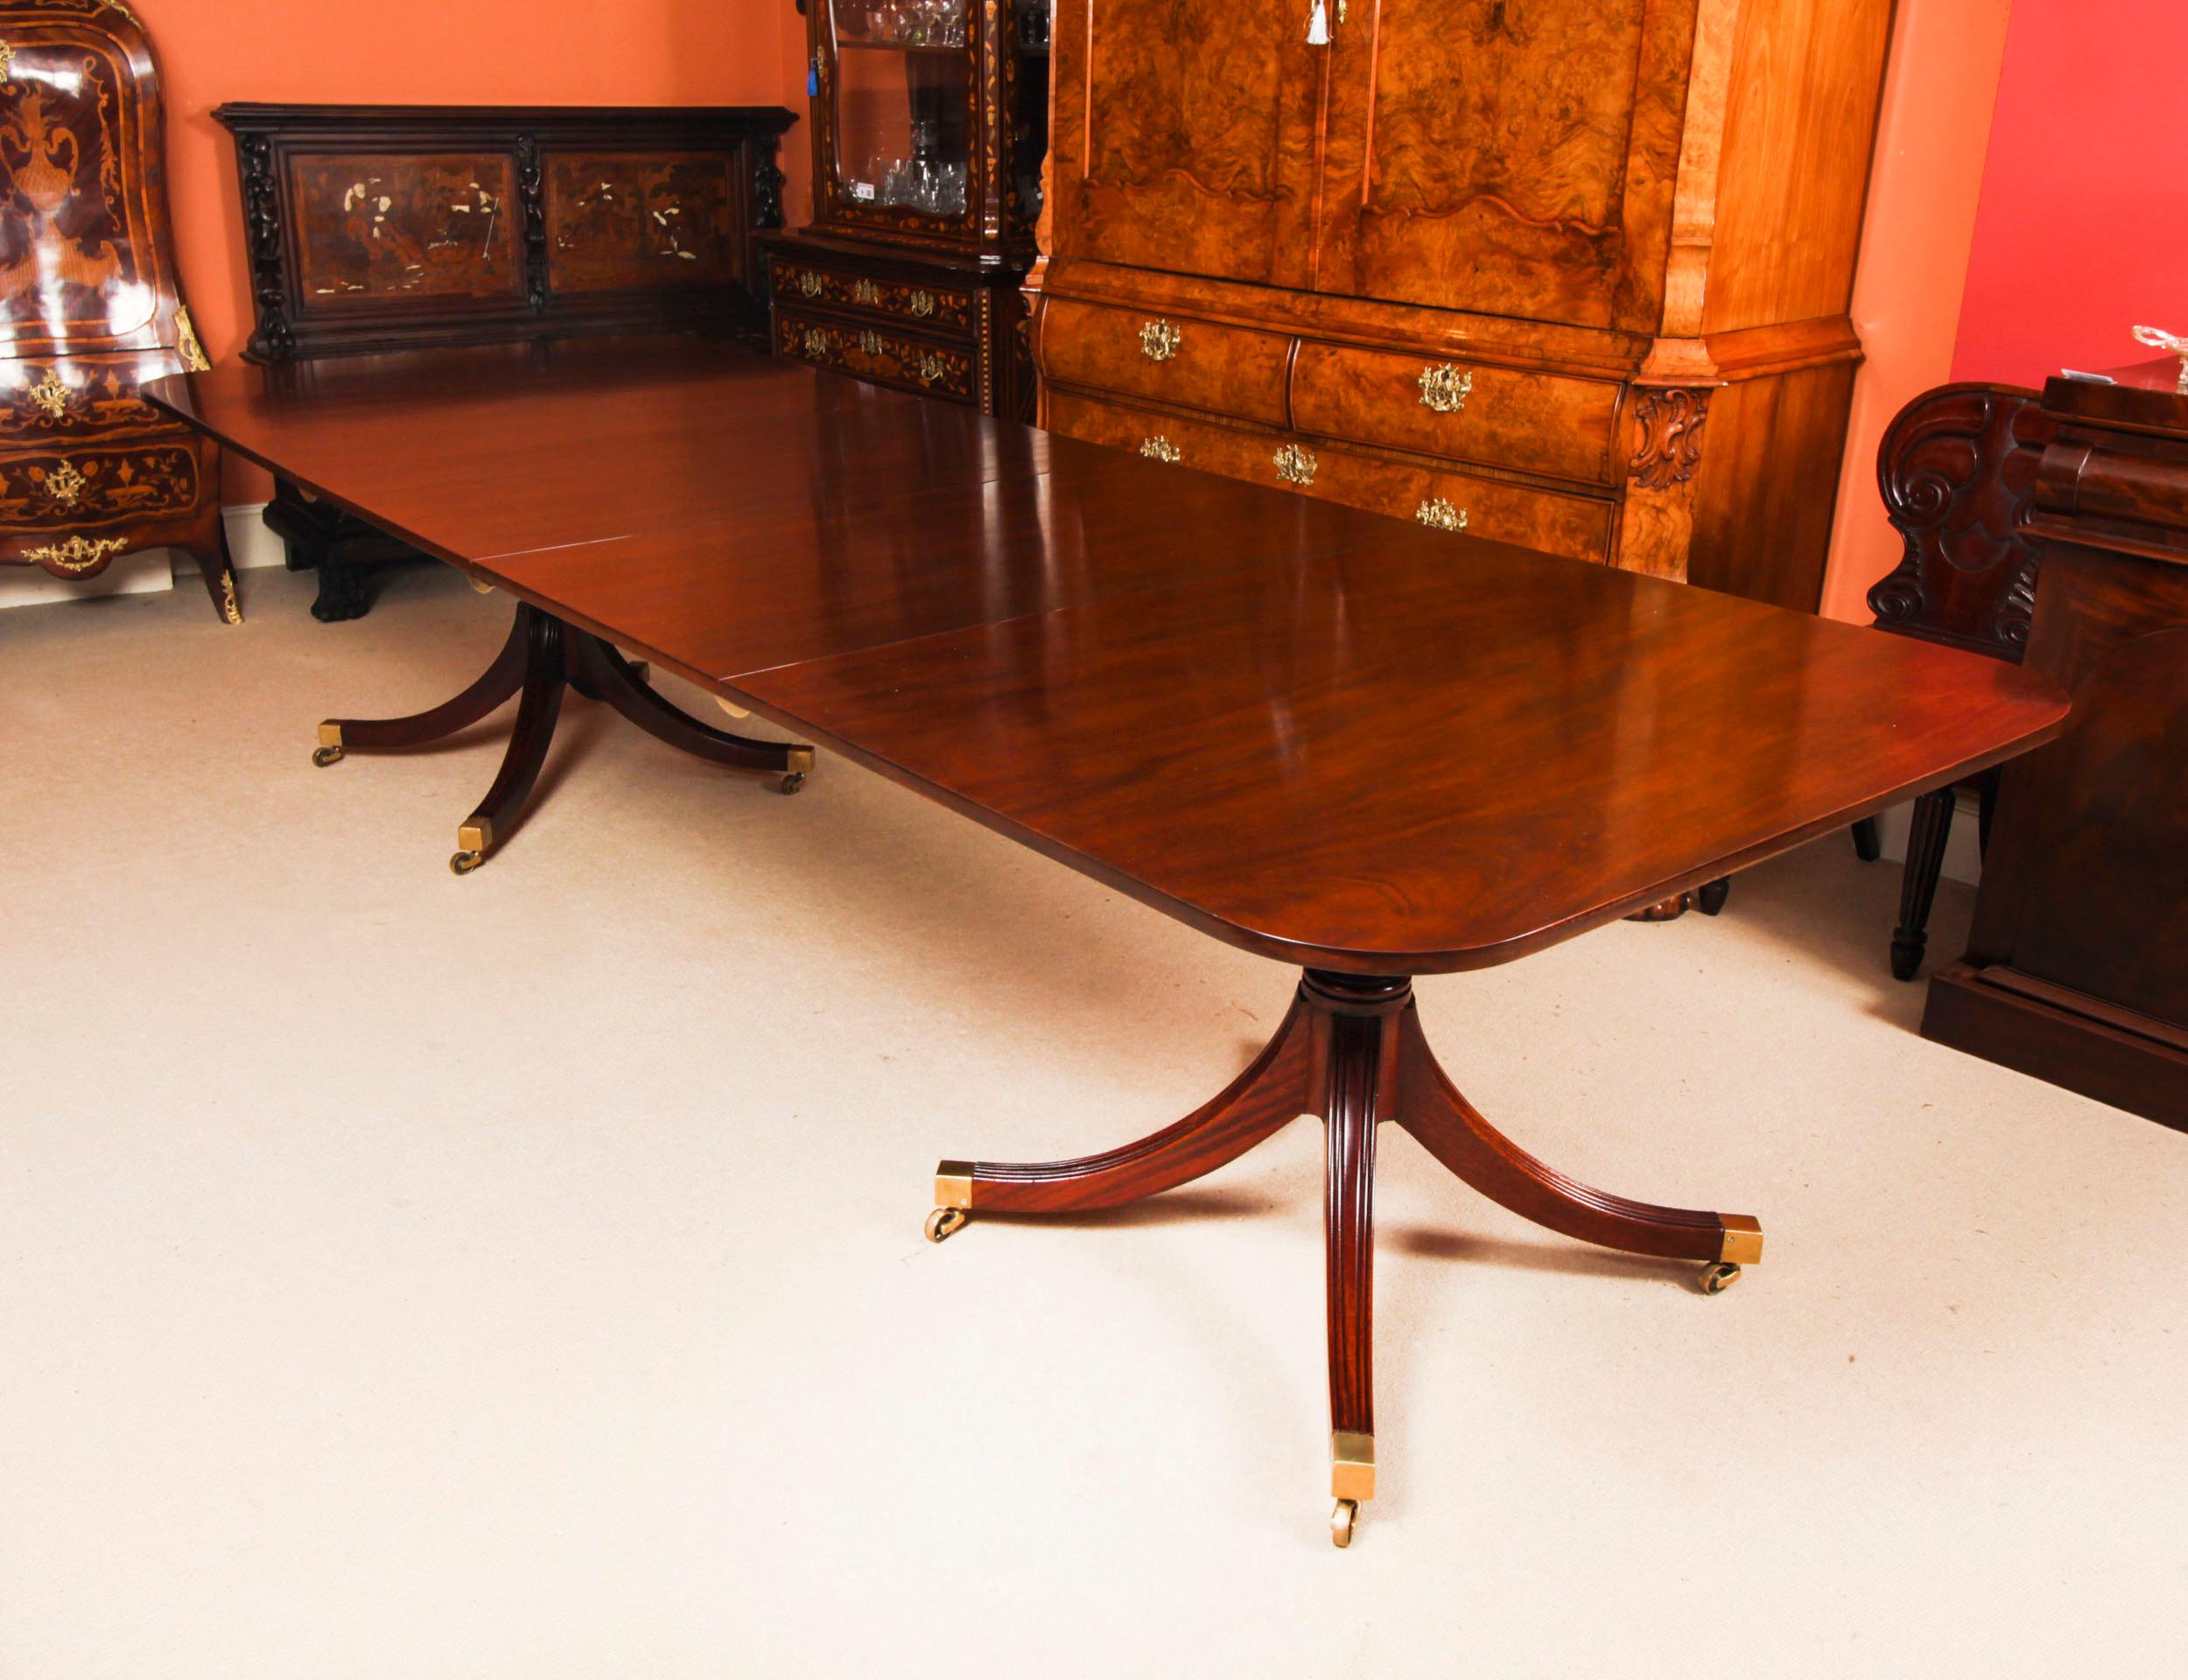 Regency Revival Vintage 12ft Dining Table & 12 Wheat Sheaf Chairs by William Tillman 20th C